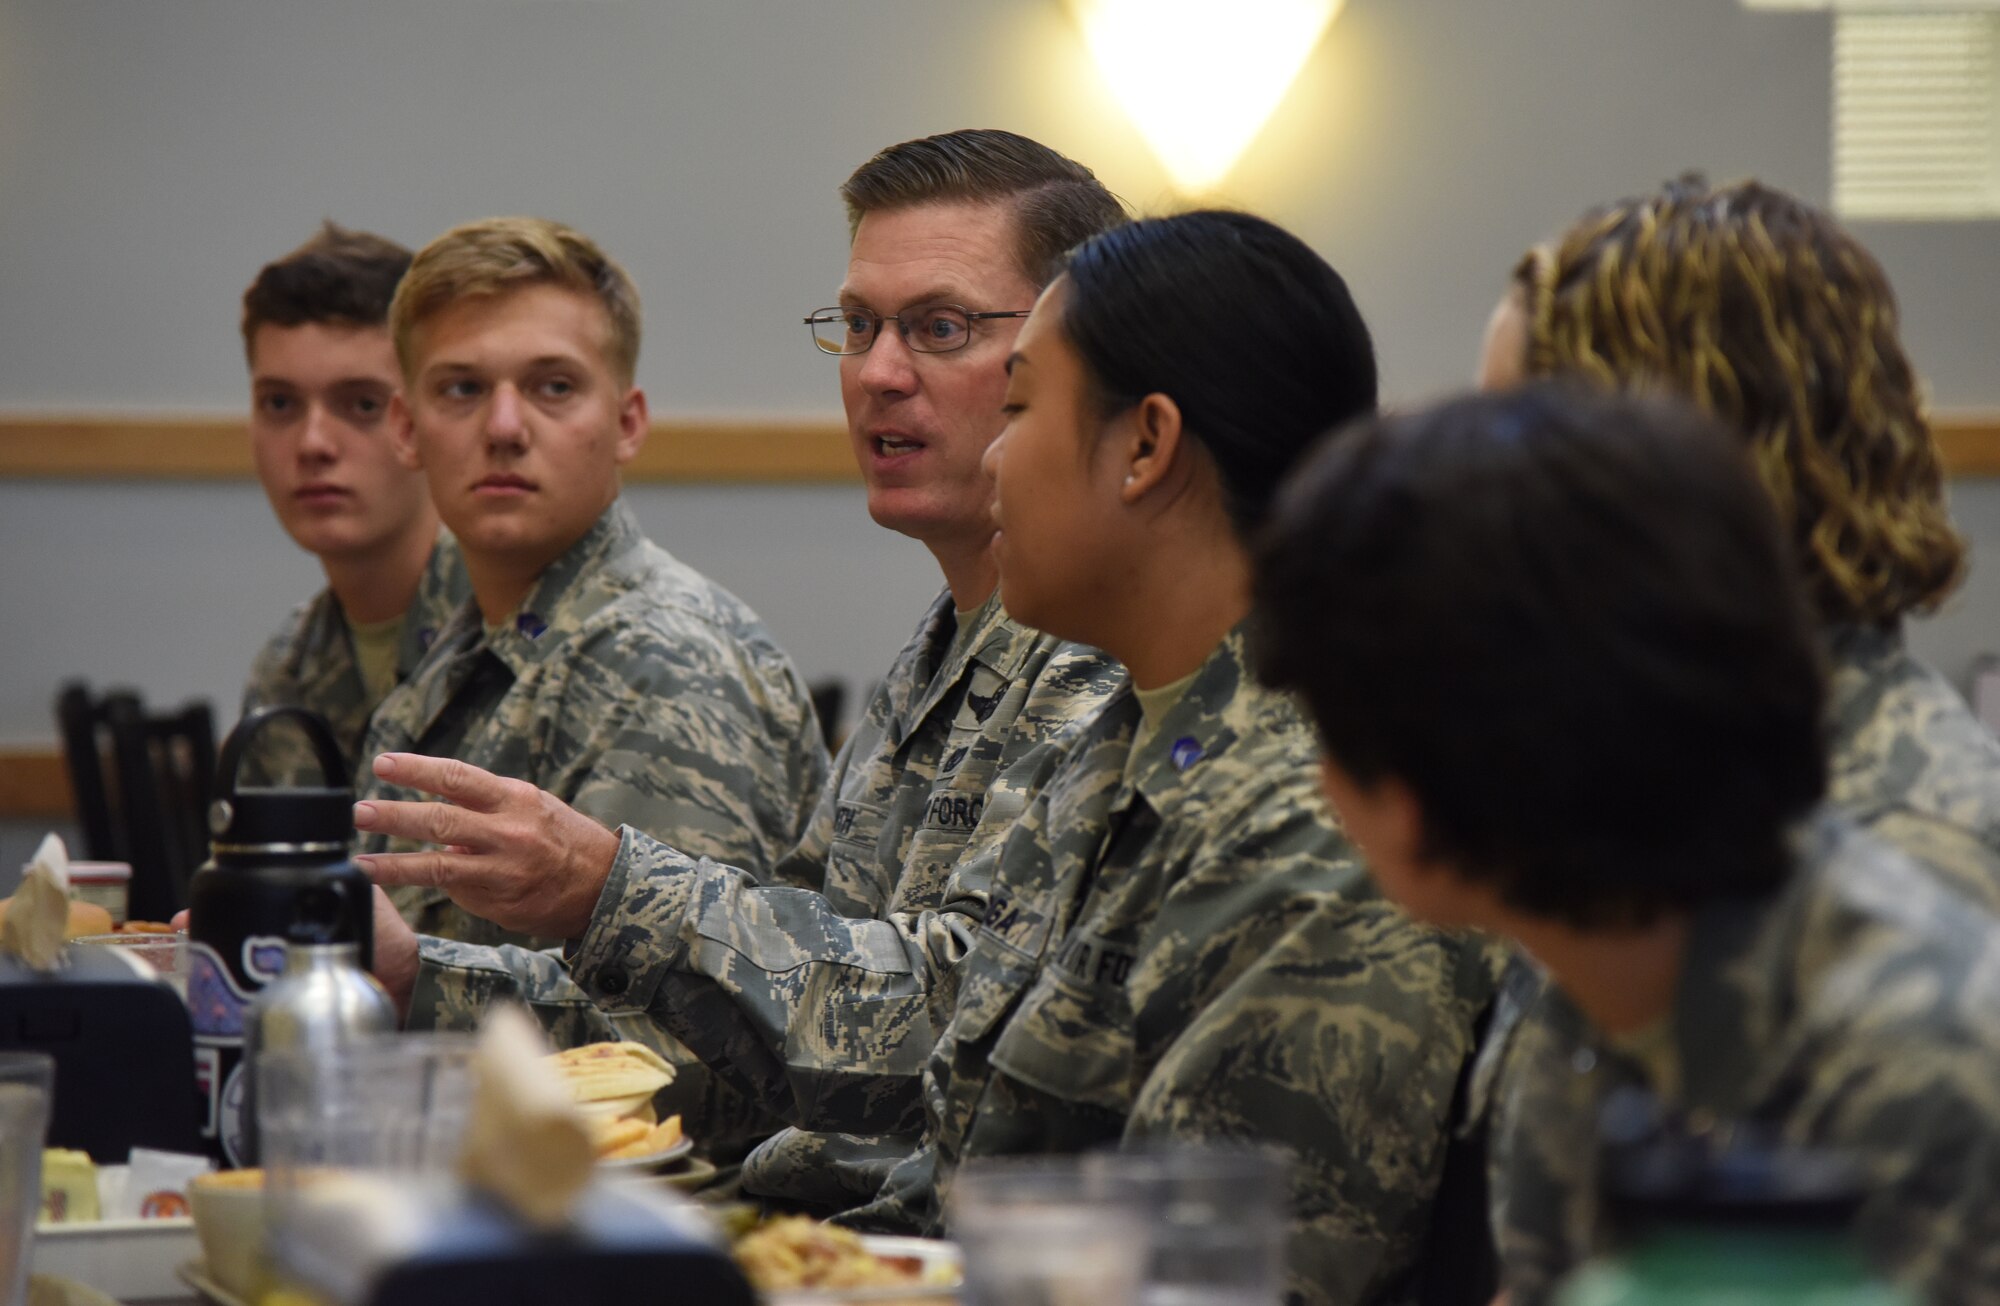 U.S. Air Force Col. C. Mike Smith, 81st Training Wing vice commander, provides comments to ROTC cadets during a mentorship luncheon in the Azalea Dining Facility at Keesler Air Force Base, Mississippi, July 9, 2018. Cadets from various college and university ROTC programs attended a two-and-a-half-week professional development training course during their stay at Keesler. (U.S. Air Force photo by Kemberly Groue)